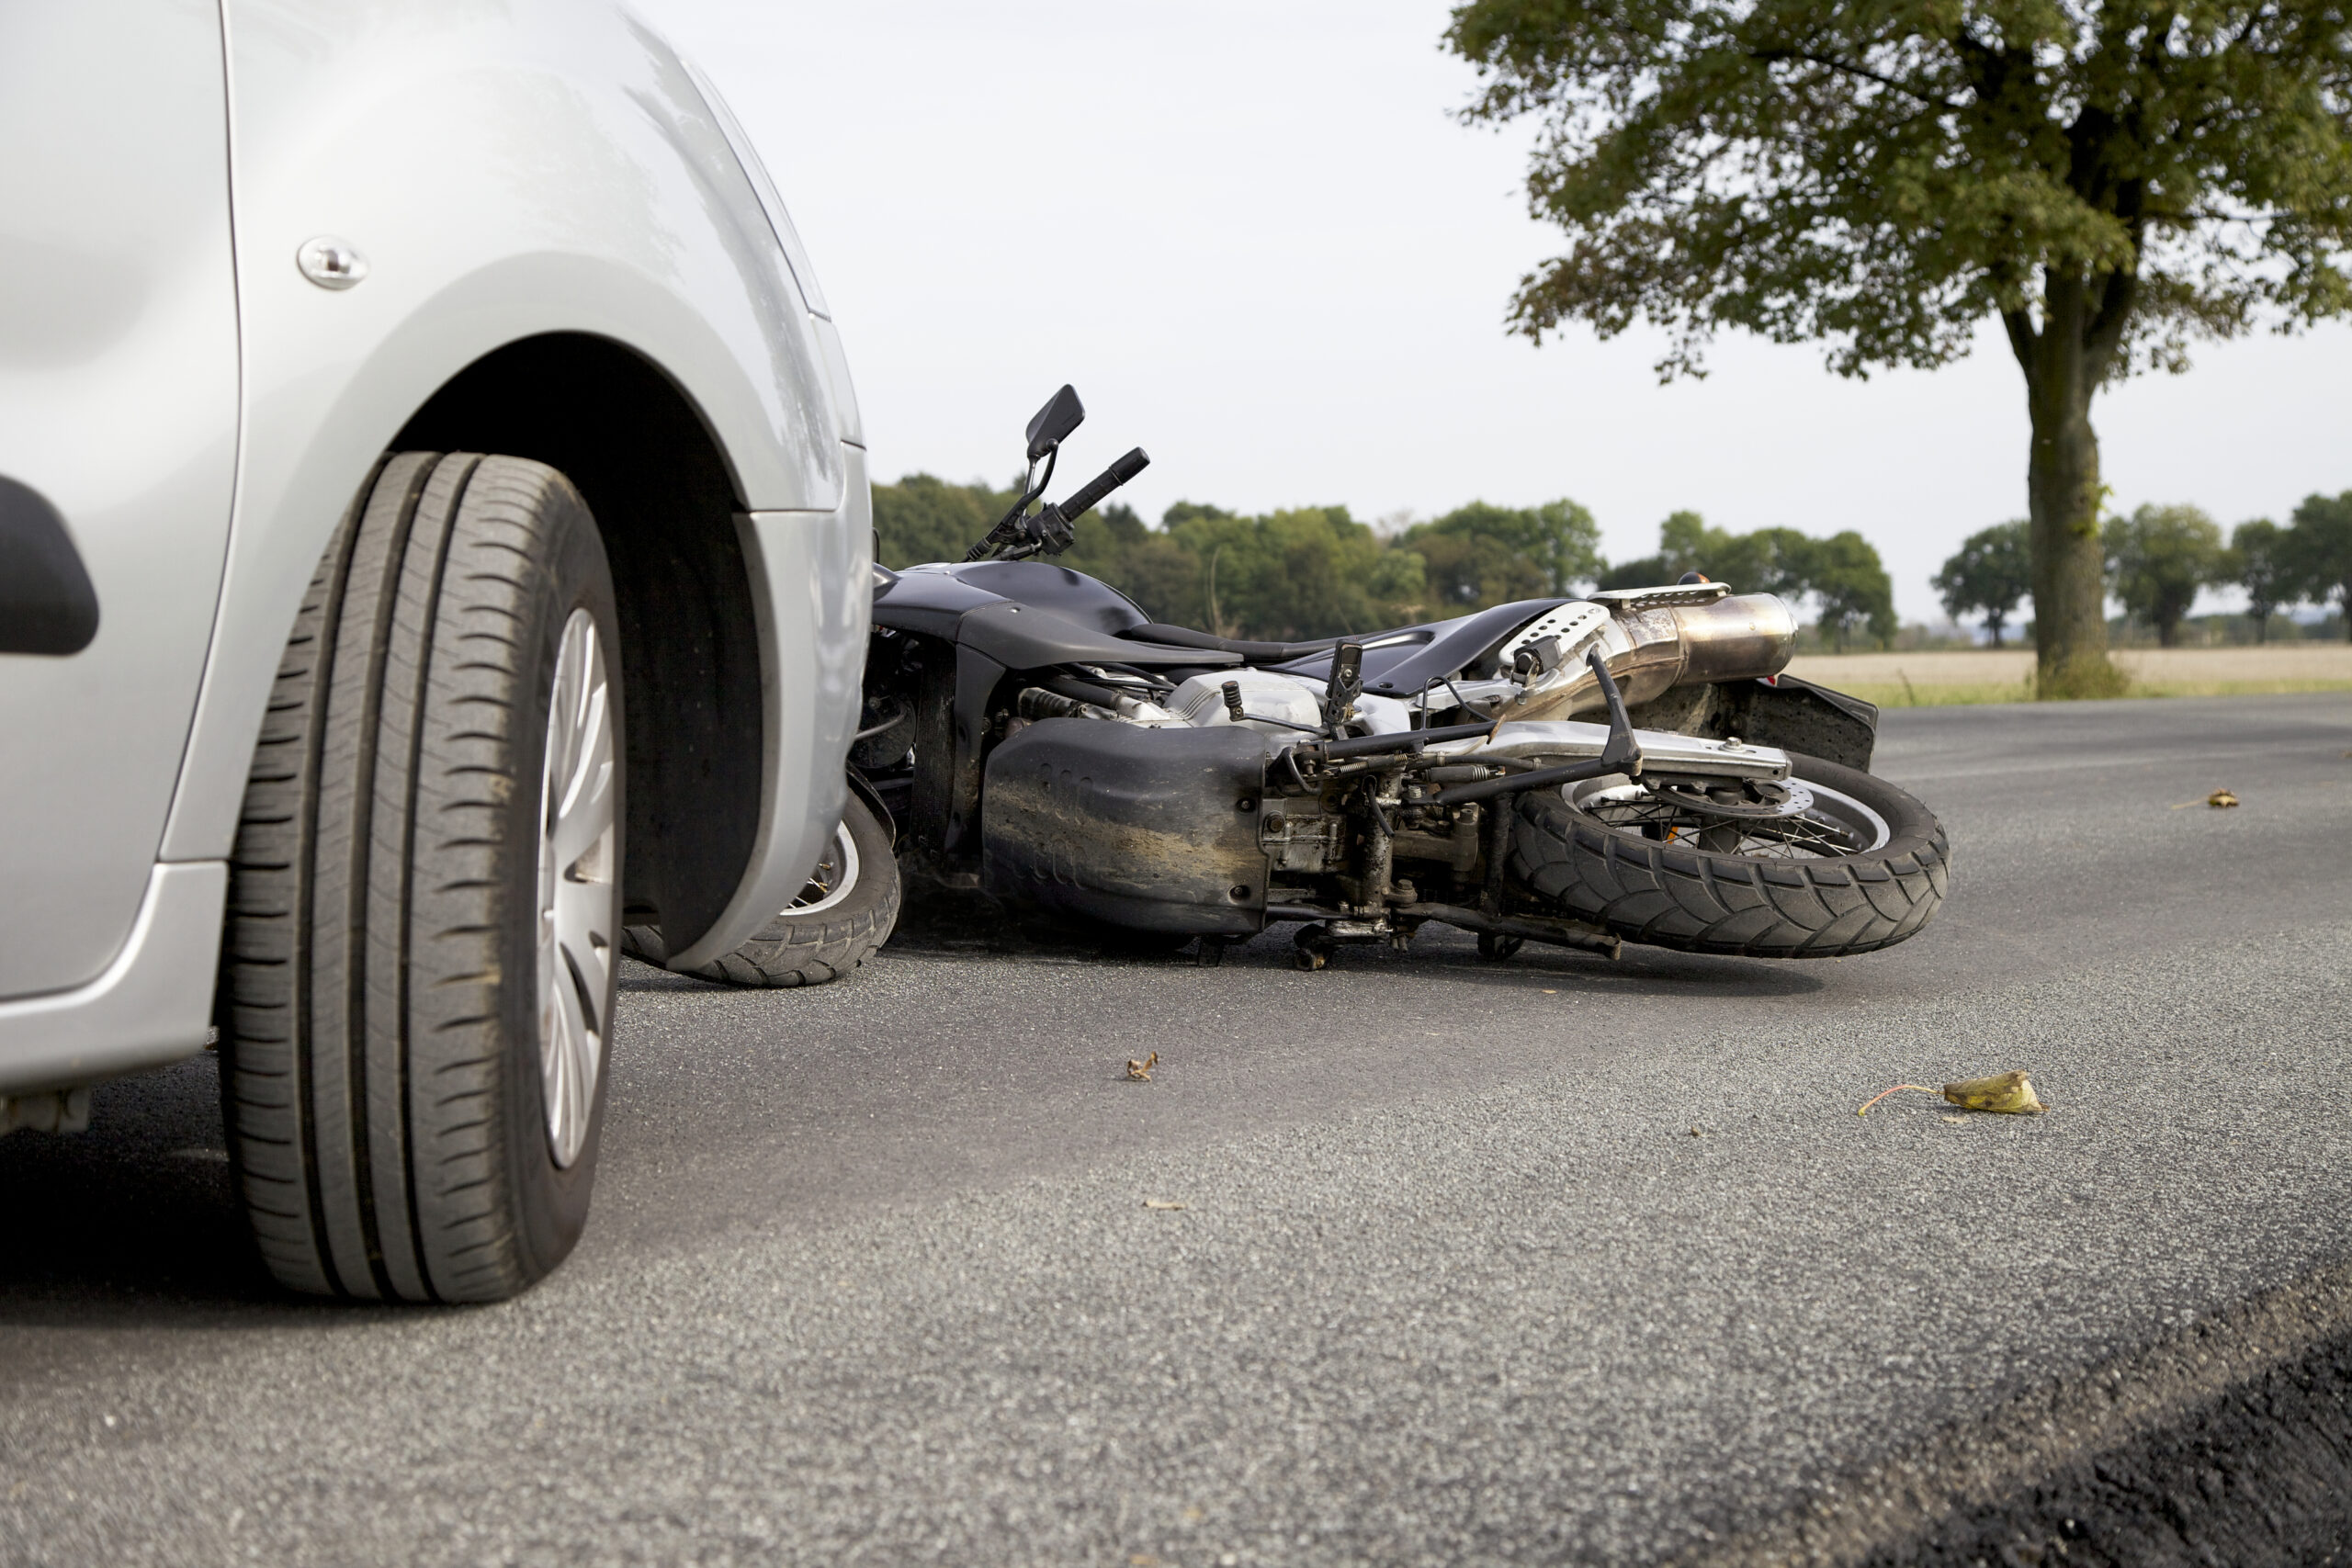 Are Helmets Required for Motorcyclists by Law in Texas?